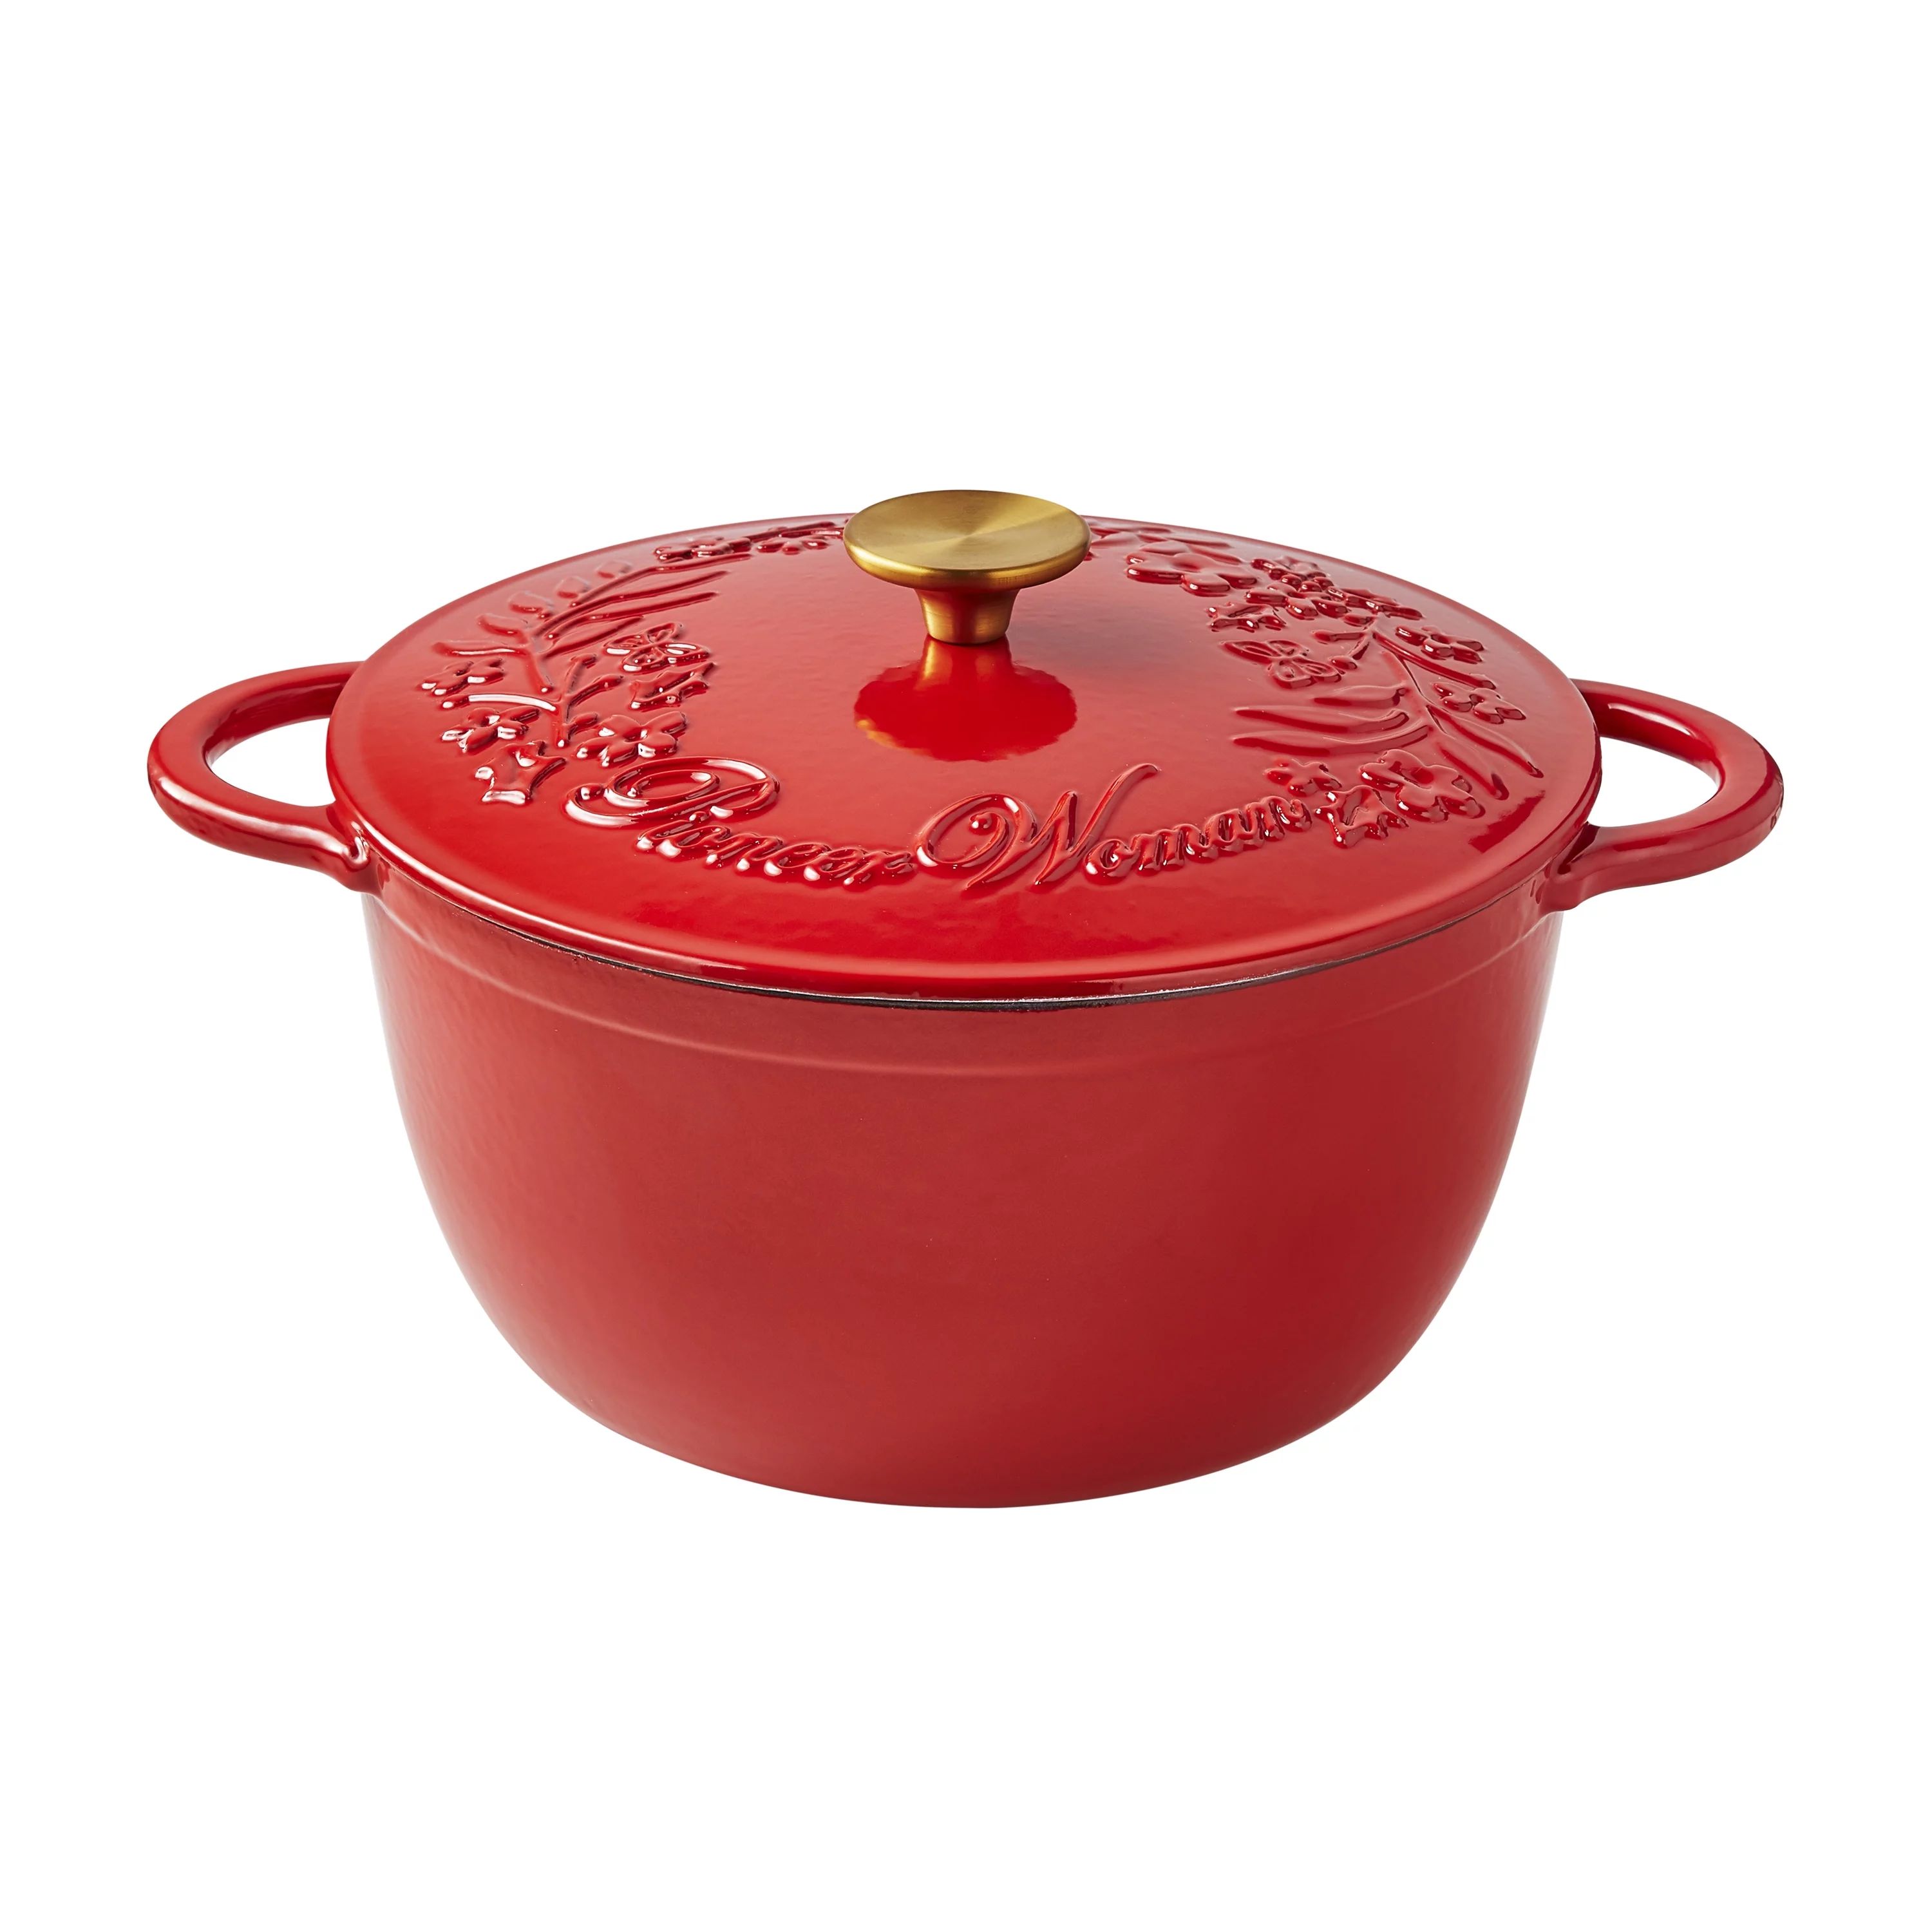 The Pioneer Woman Timeless Beauty 6-Quart Enamel-on-Cast Iron Holiday Dutch Oven, Red | Walmart (US)